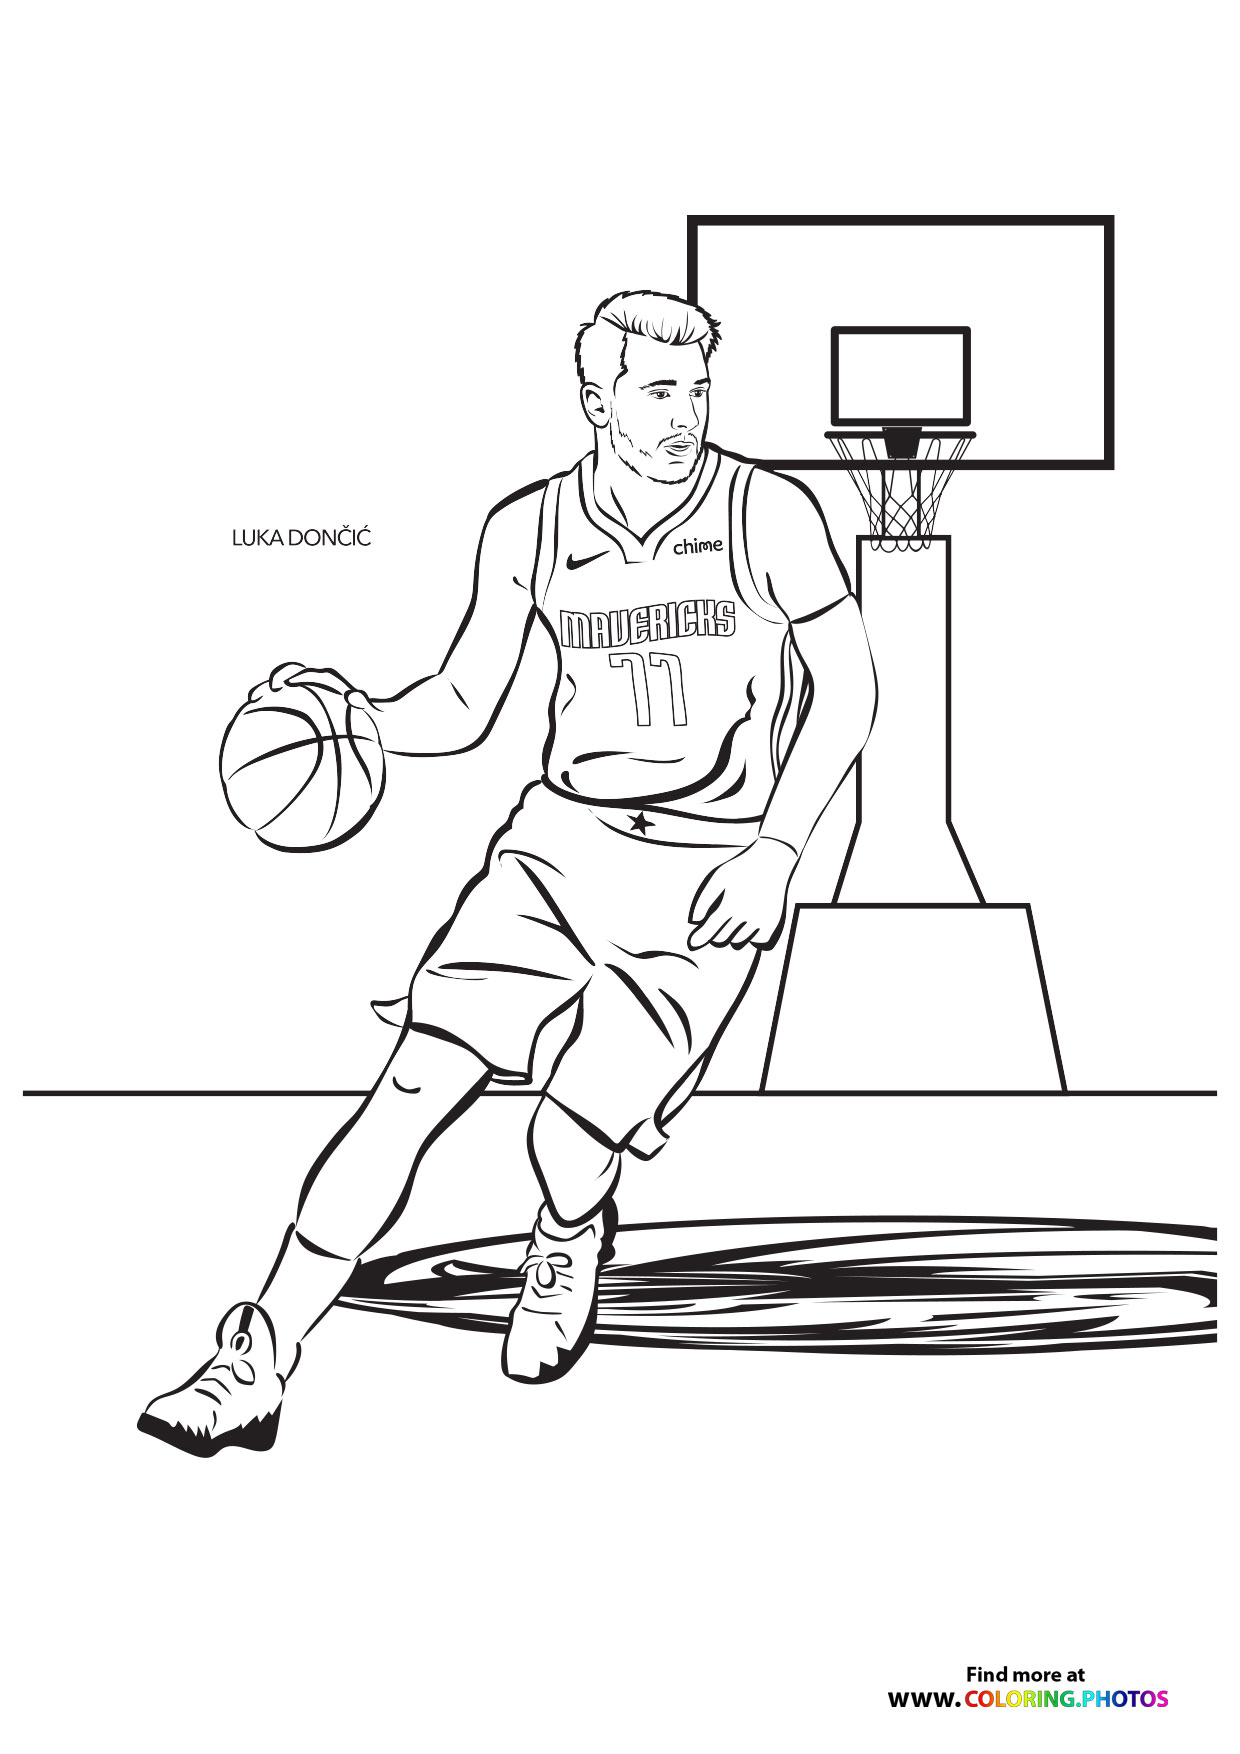 Luka Doncic - Coloring Pages for kids